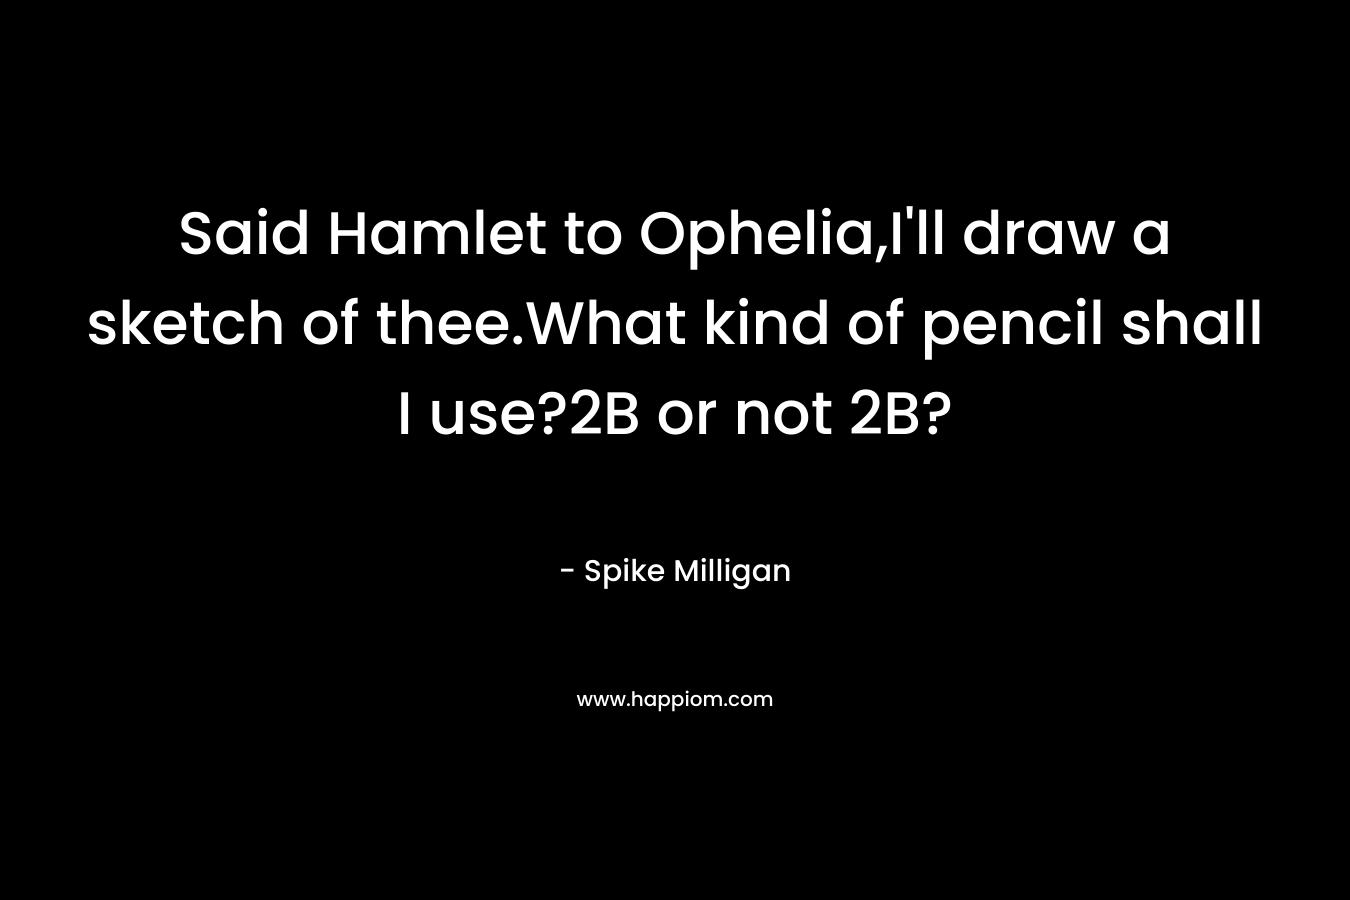 Said Hamlet to Ophelia,I'll draw a sketch of thee.What kind of pencil shall I use?2B or not 2B?